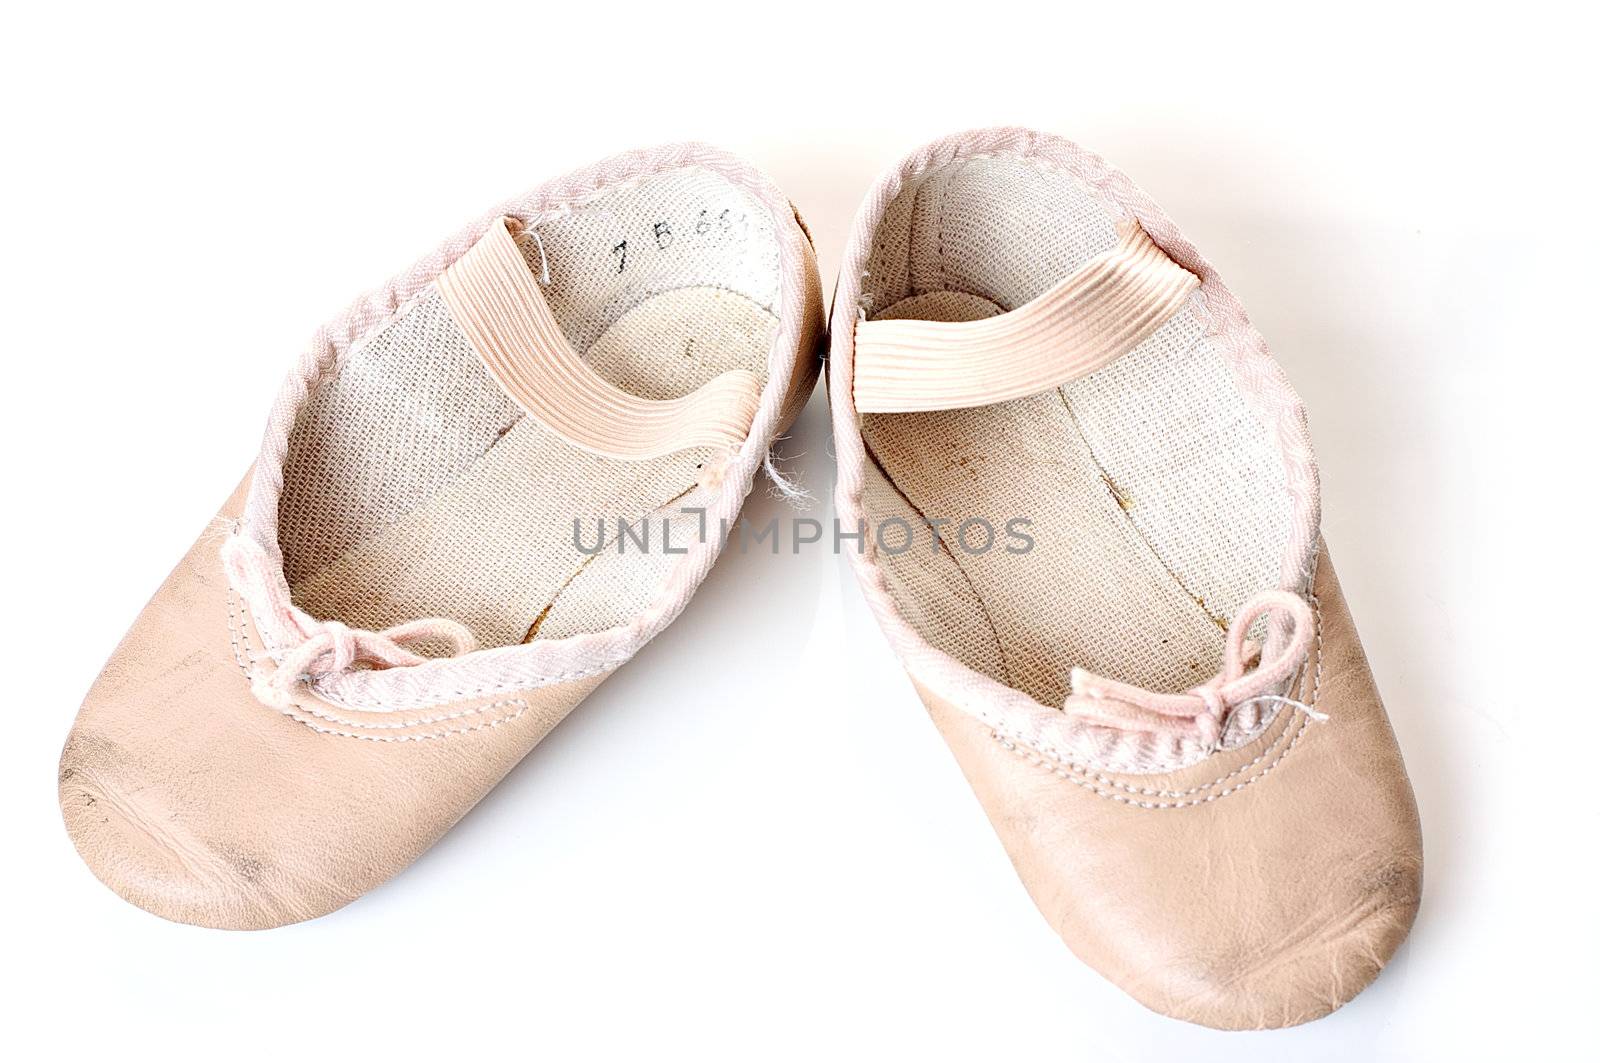 Small pink ballet shoes on a white background